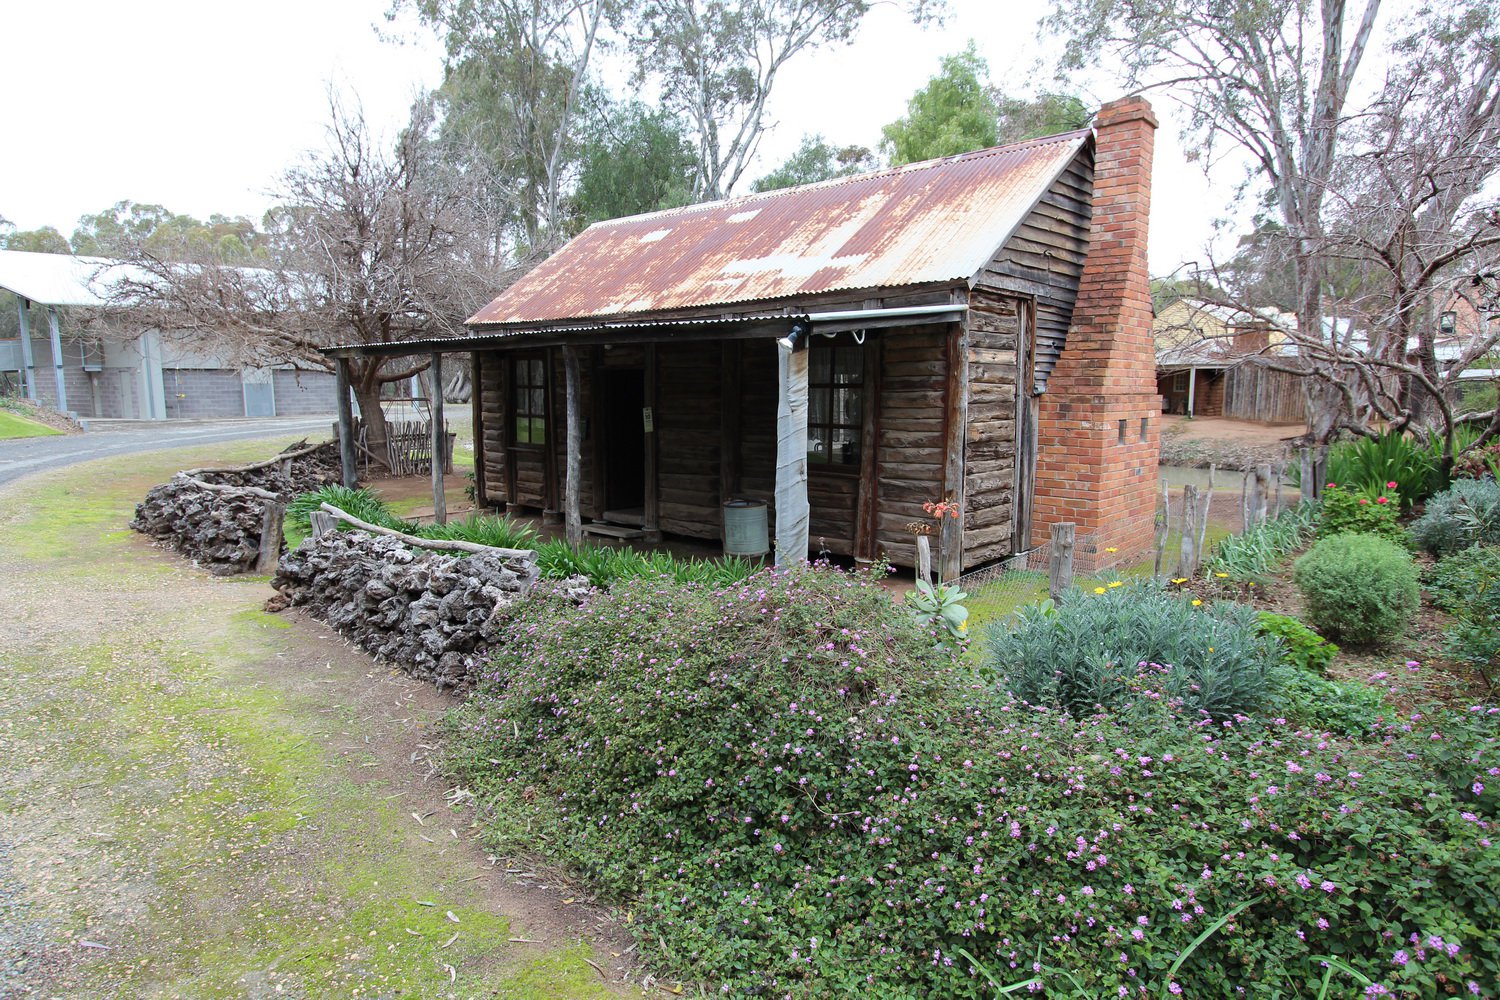 Worker's cottage, Pioneer Settlement Swan Hill. North West Victoria Tour, July 2020.